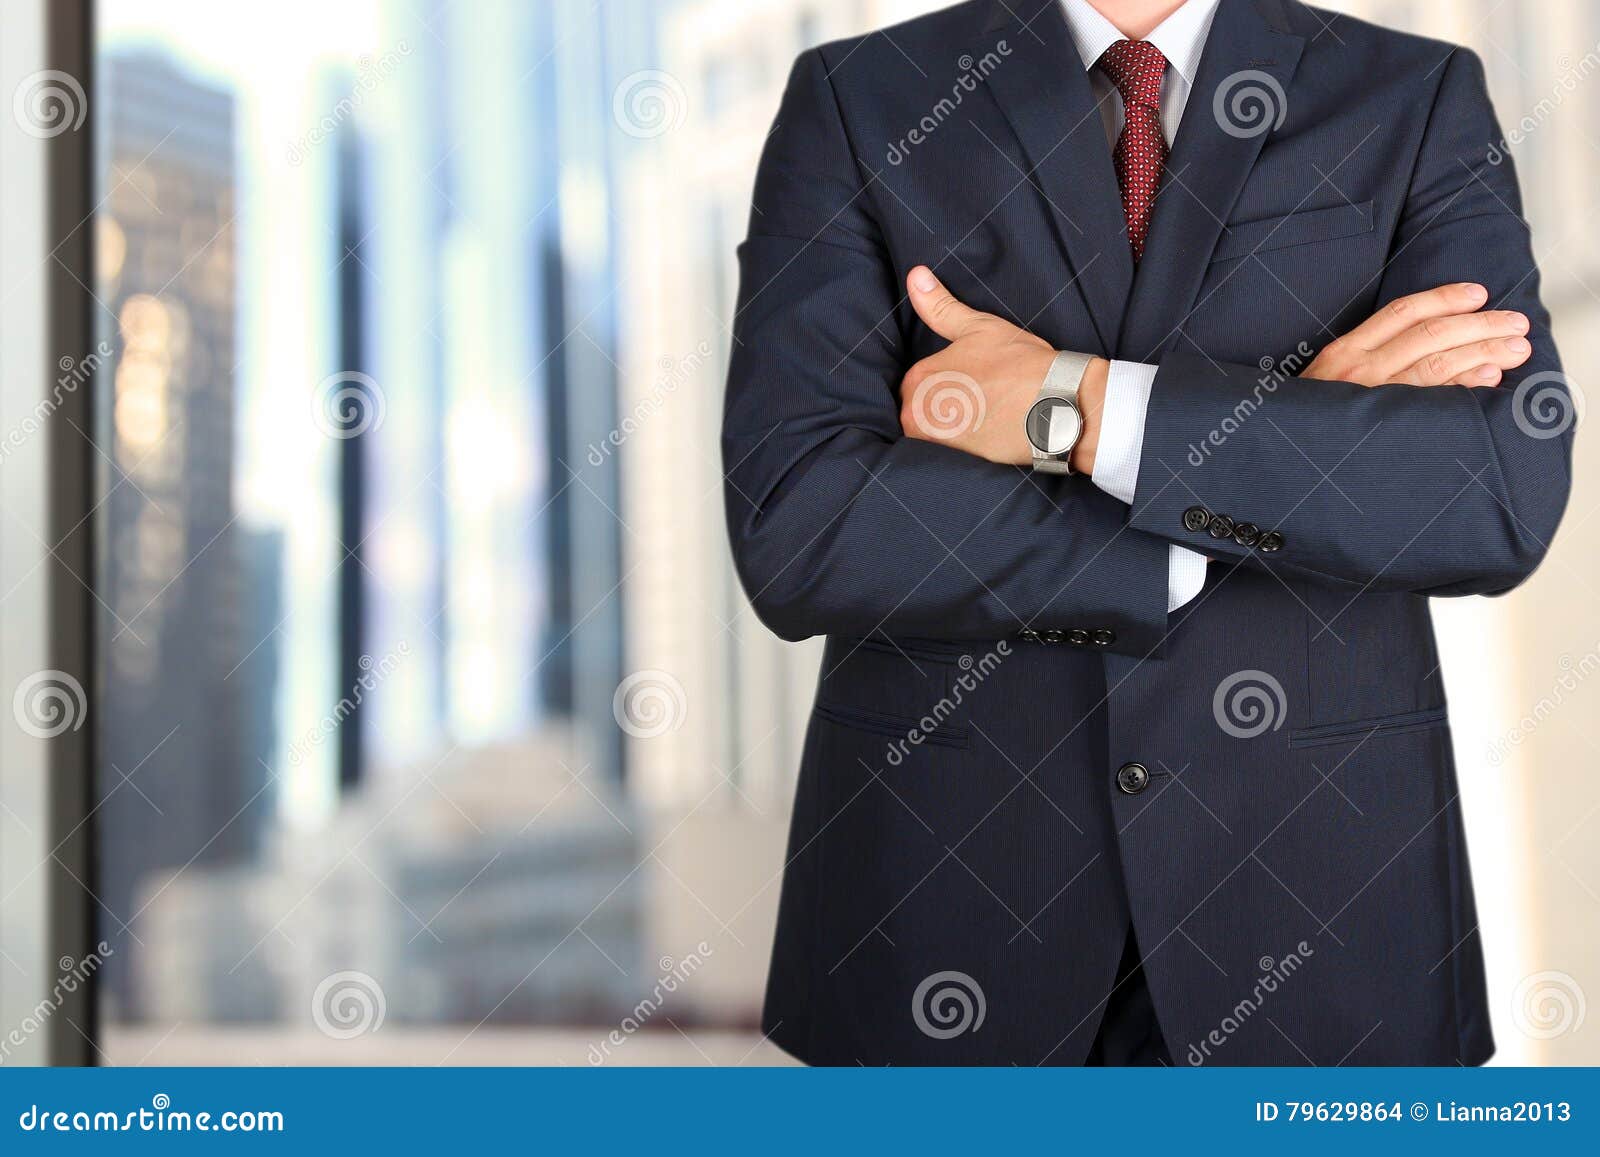 business and office concept - elegant young fashion buisness man in a blue/navy suit